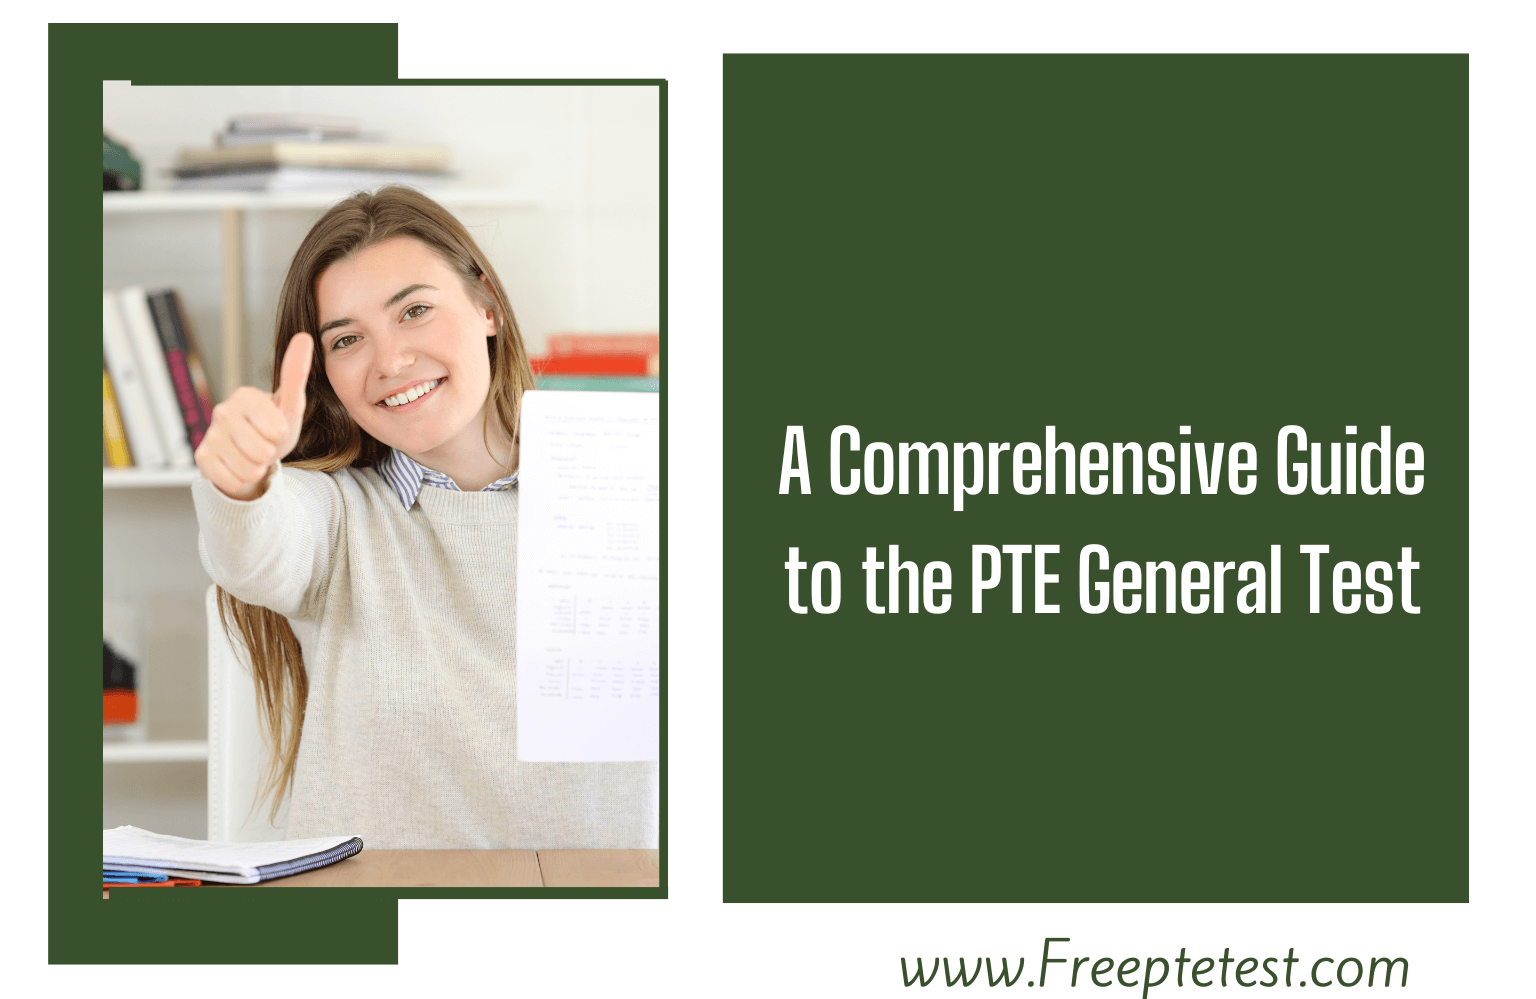 A Comprehensive Guide to the PTE General Test